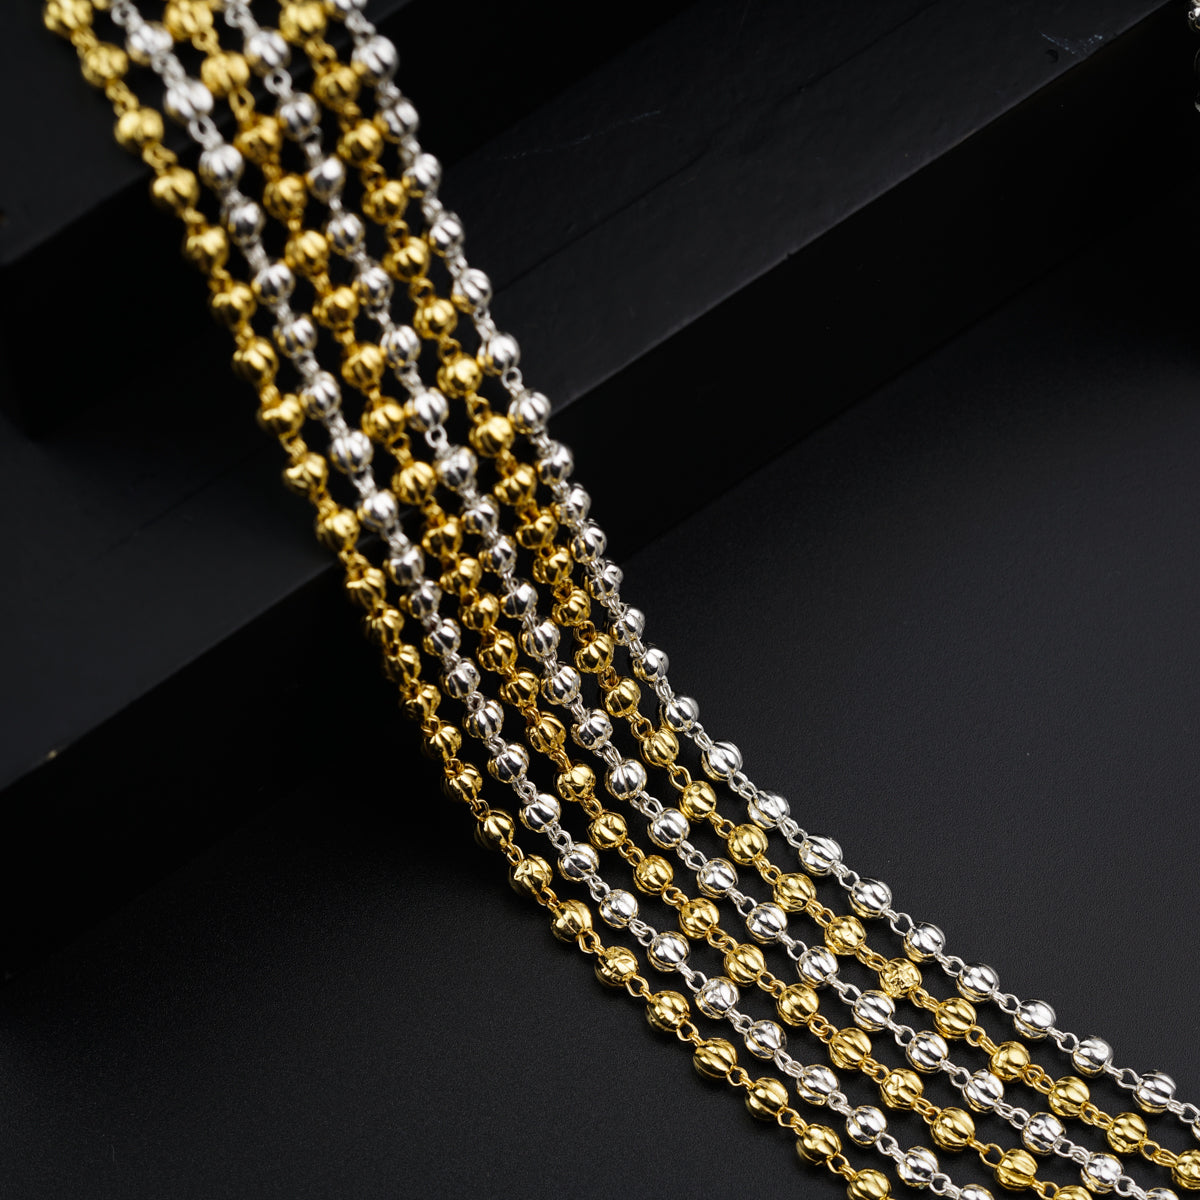 a gold and silver chain on a black surface